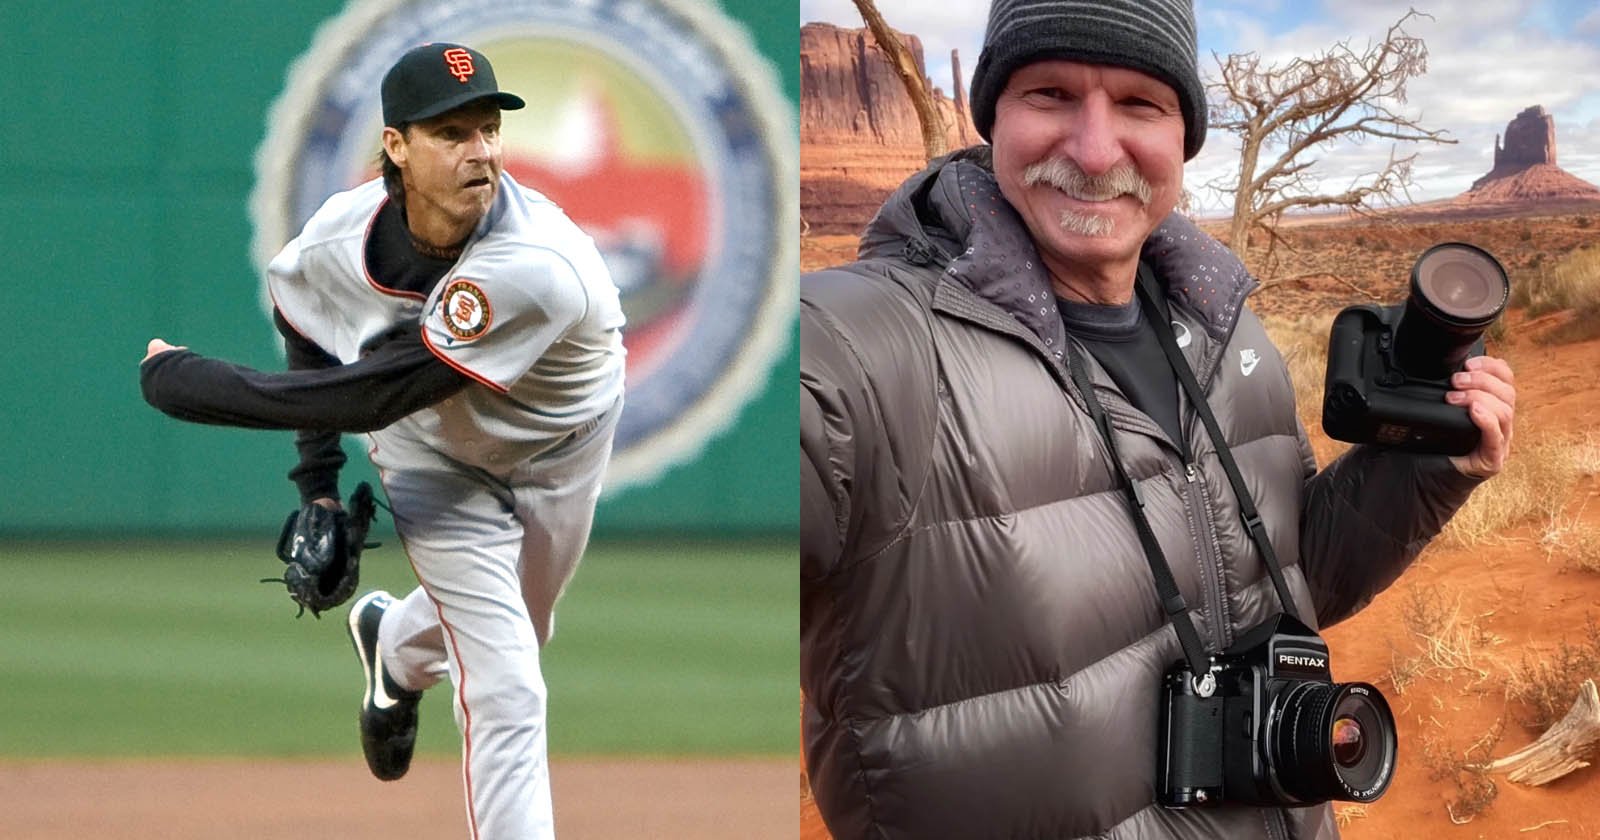  randy johnson from hall fame pitcher pro photographer 